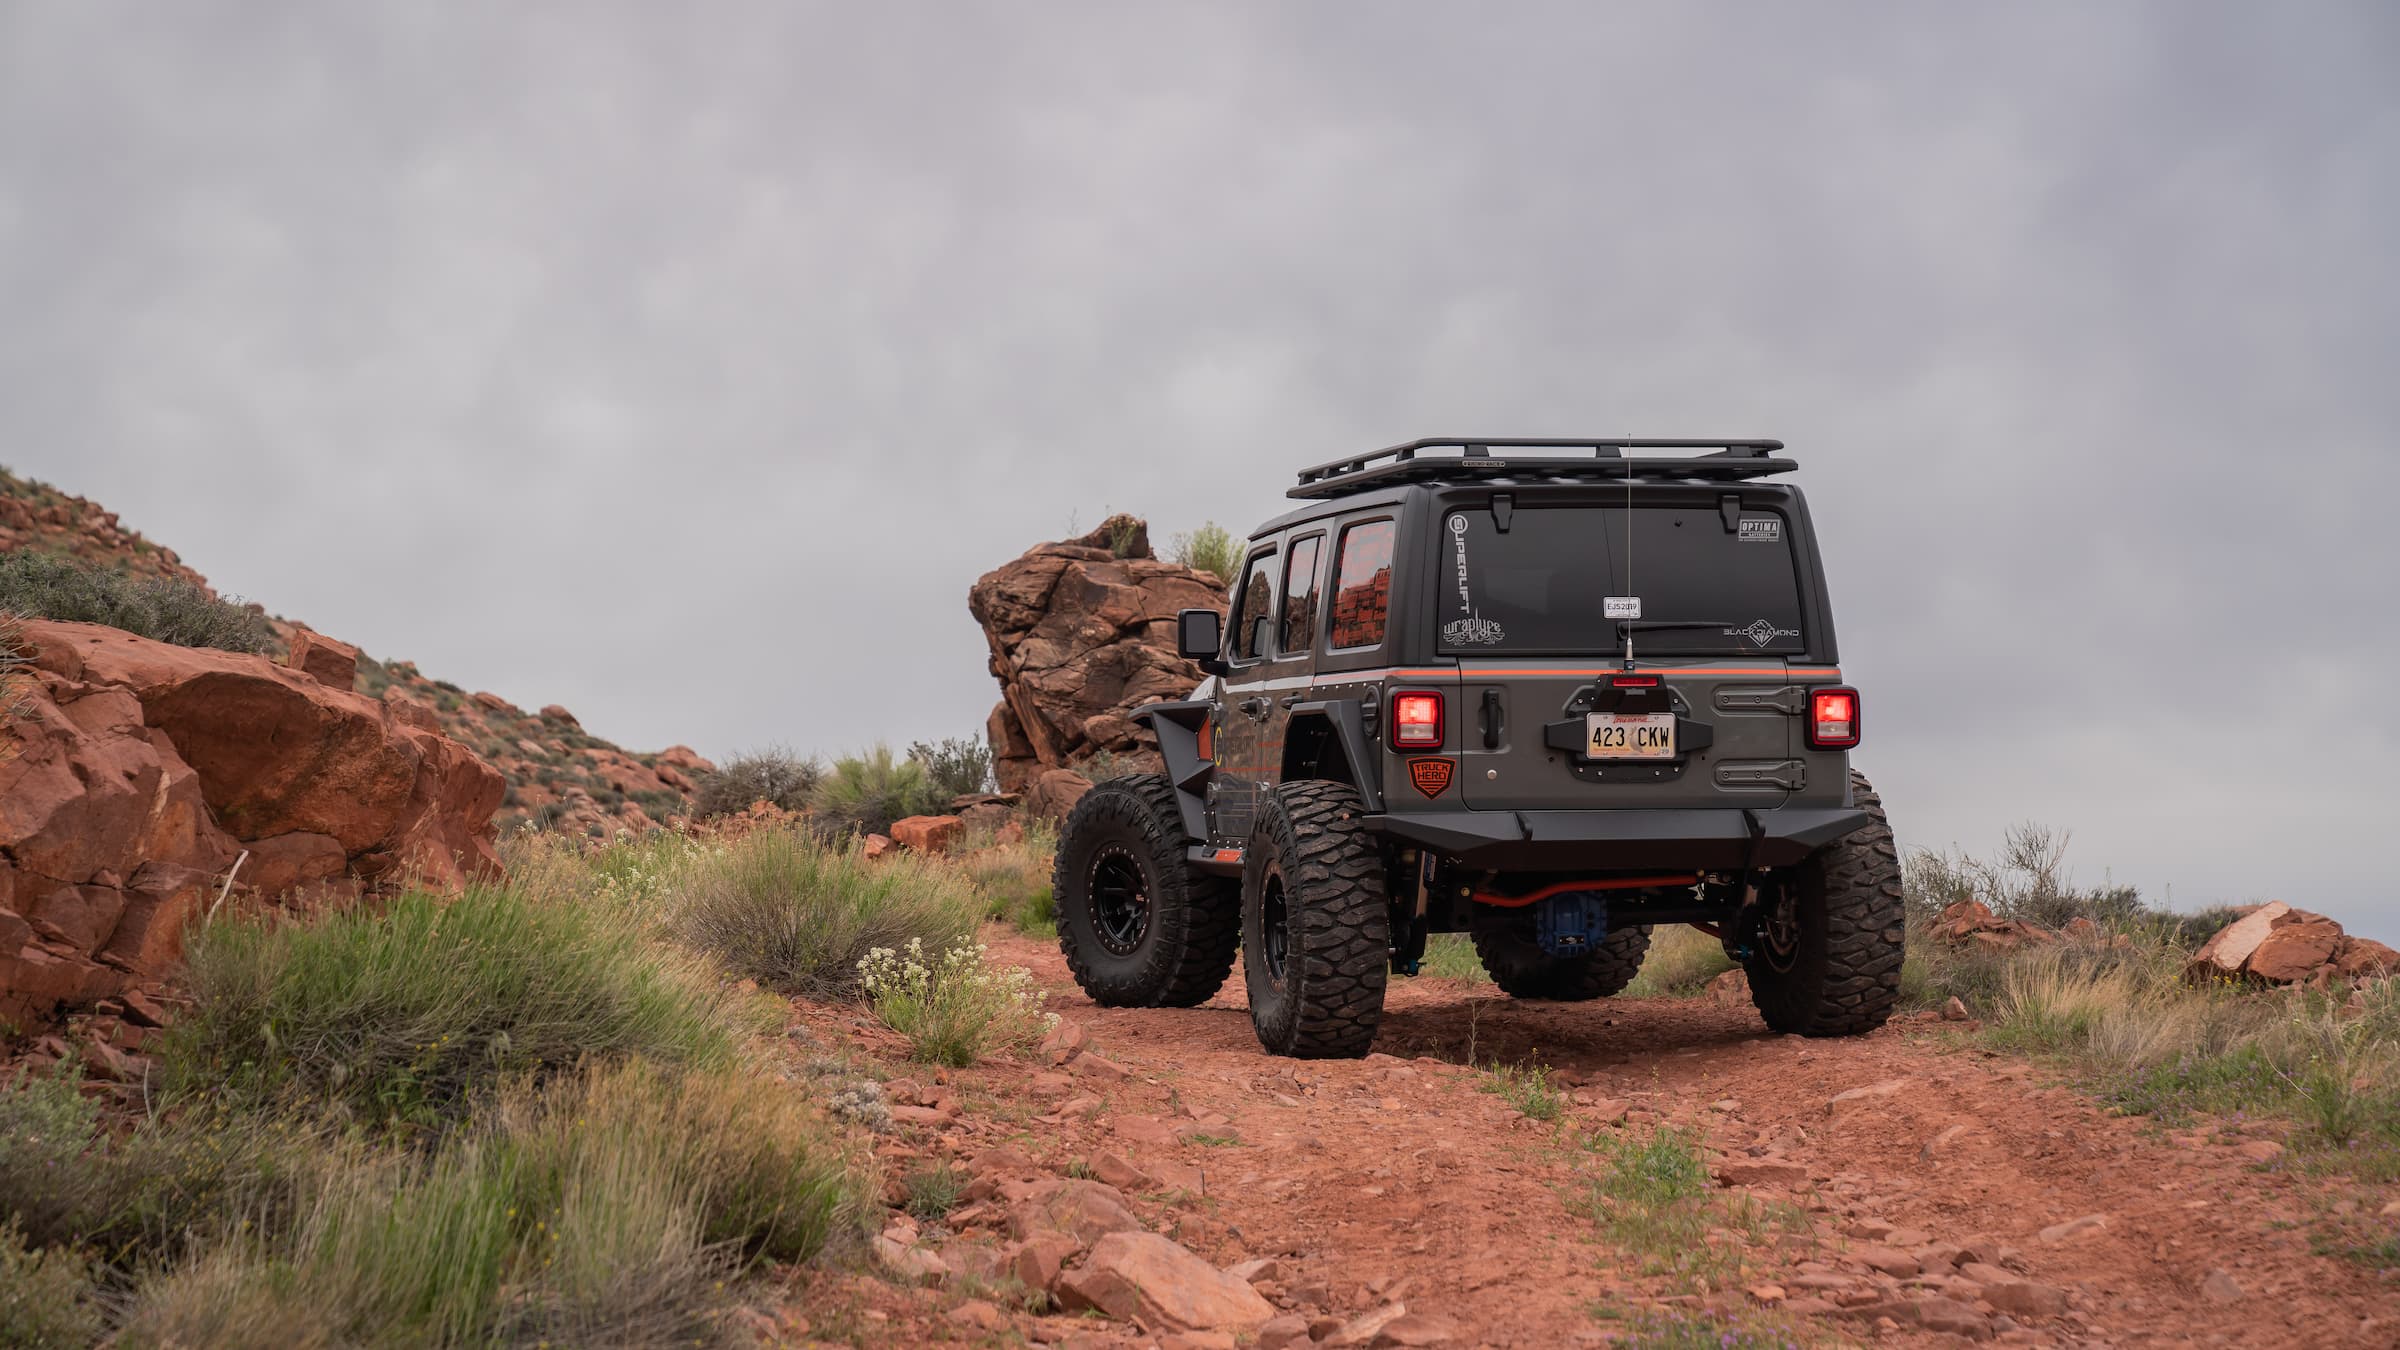 ATTURO TIRE TO SPONSOR FOUR TRAILS AT EASTER JEEP SAFARI 2021